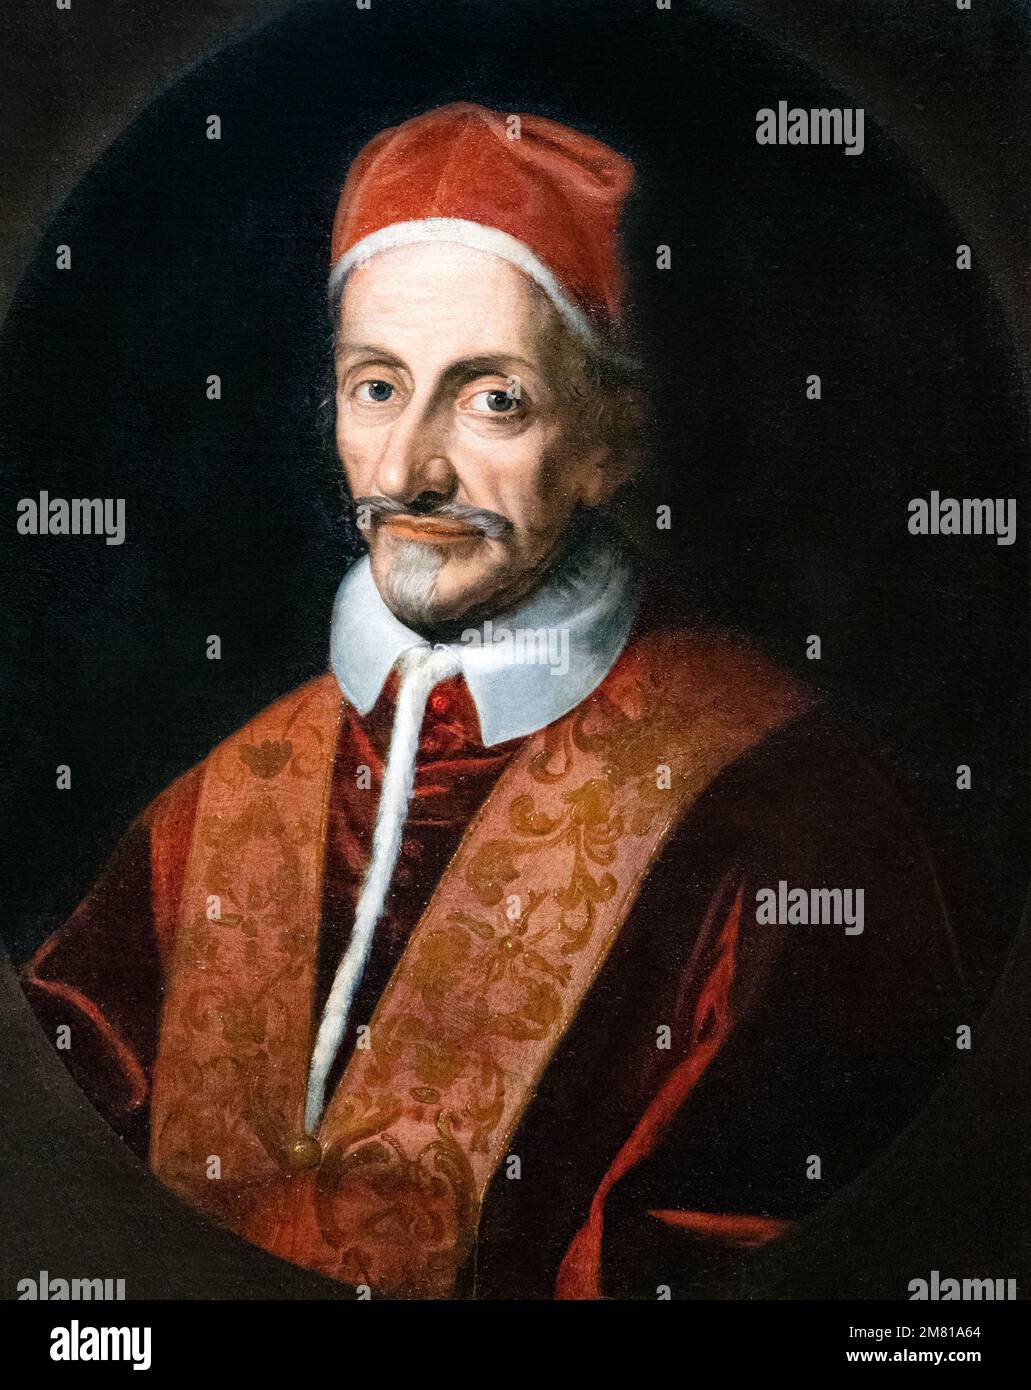 17th century art; Oil painting portrait of Pope Innocent XI, painted in Italy, c. 1680, artist unknown; Wawel Castle Museum, Krakow Poland Stock Photo